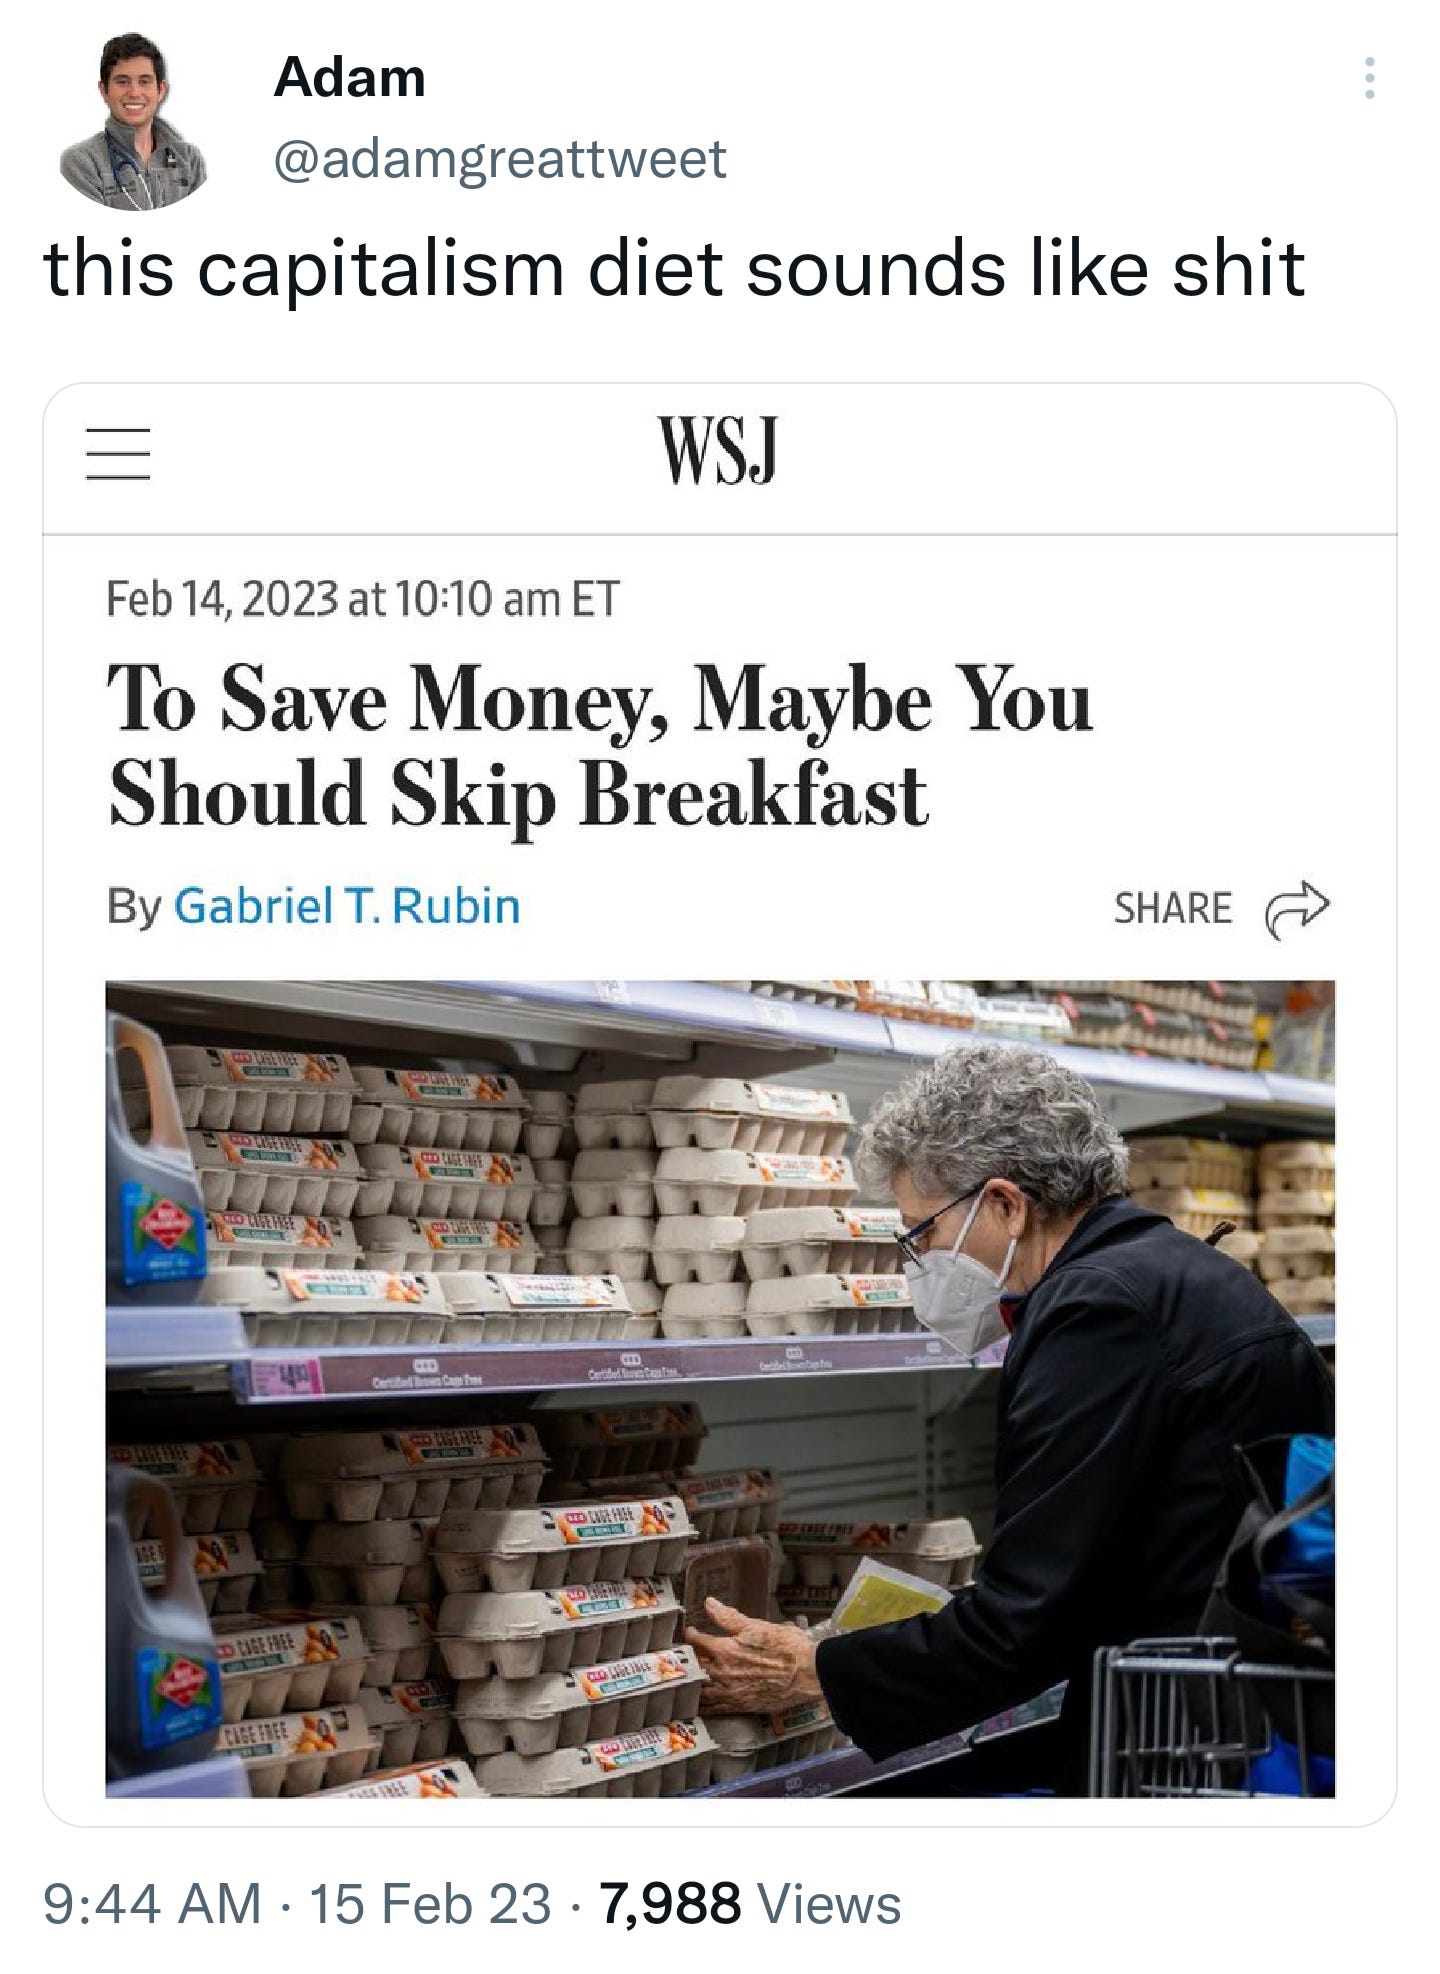 A tweet by @adamgreattweet that reads "this capitalism diet sounds like shit" above a WSJ headline reading "To Save Money, Maybe You Should Skip Breakfast"